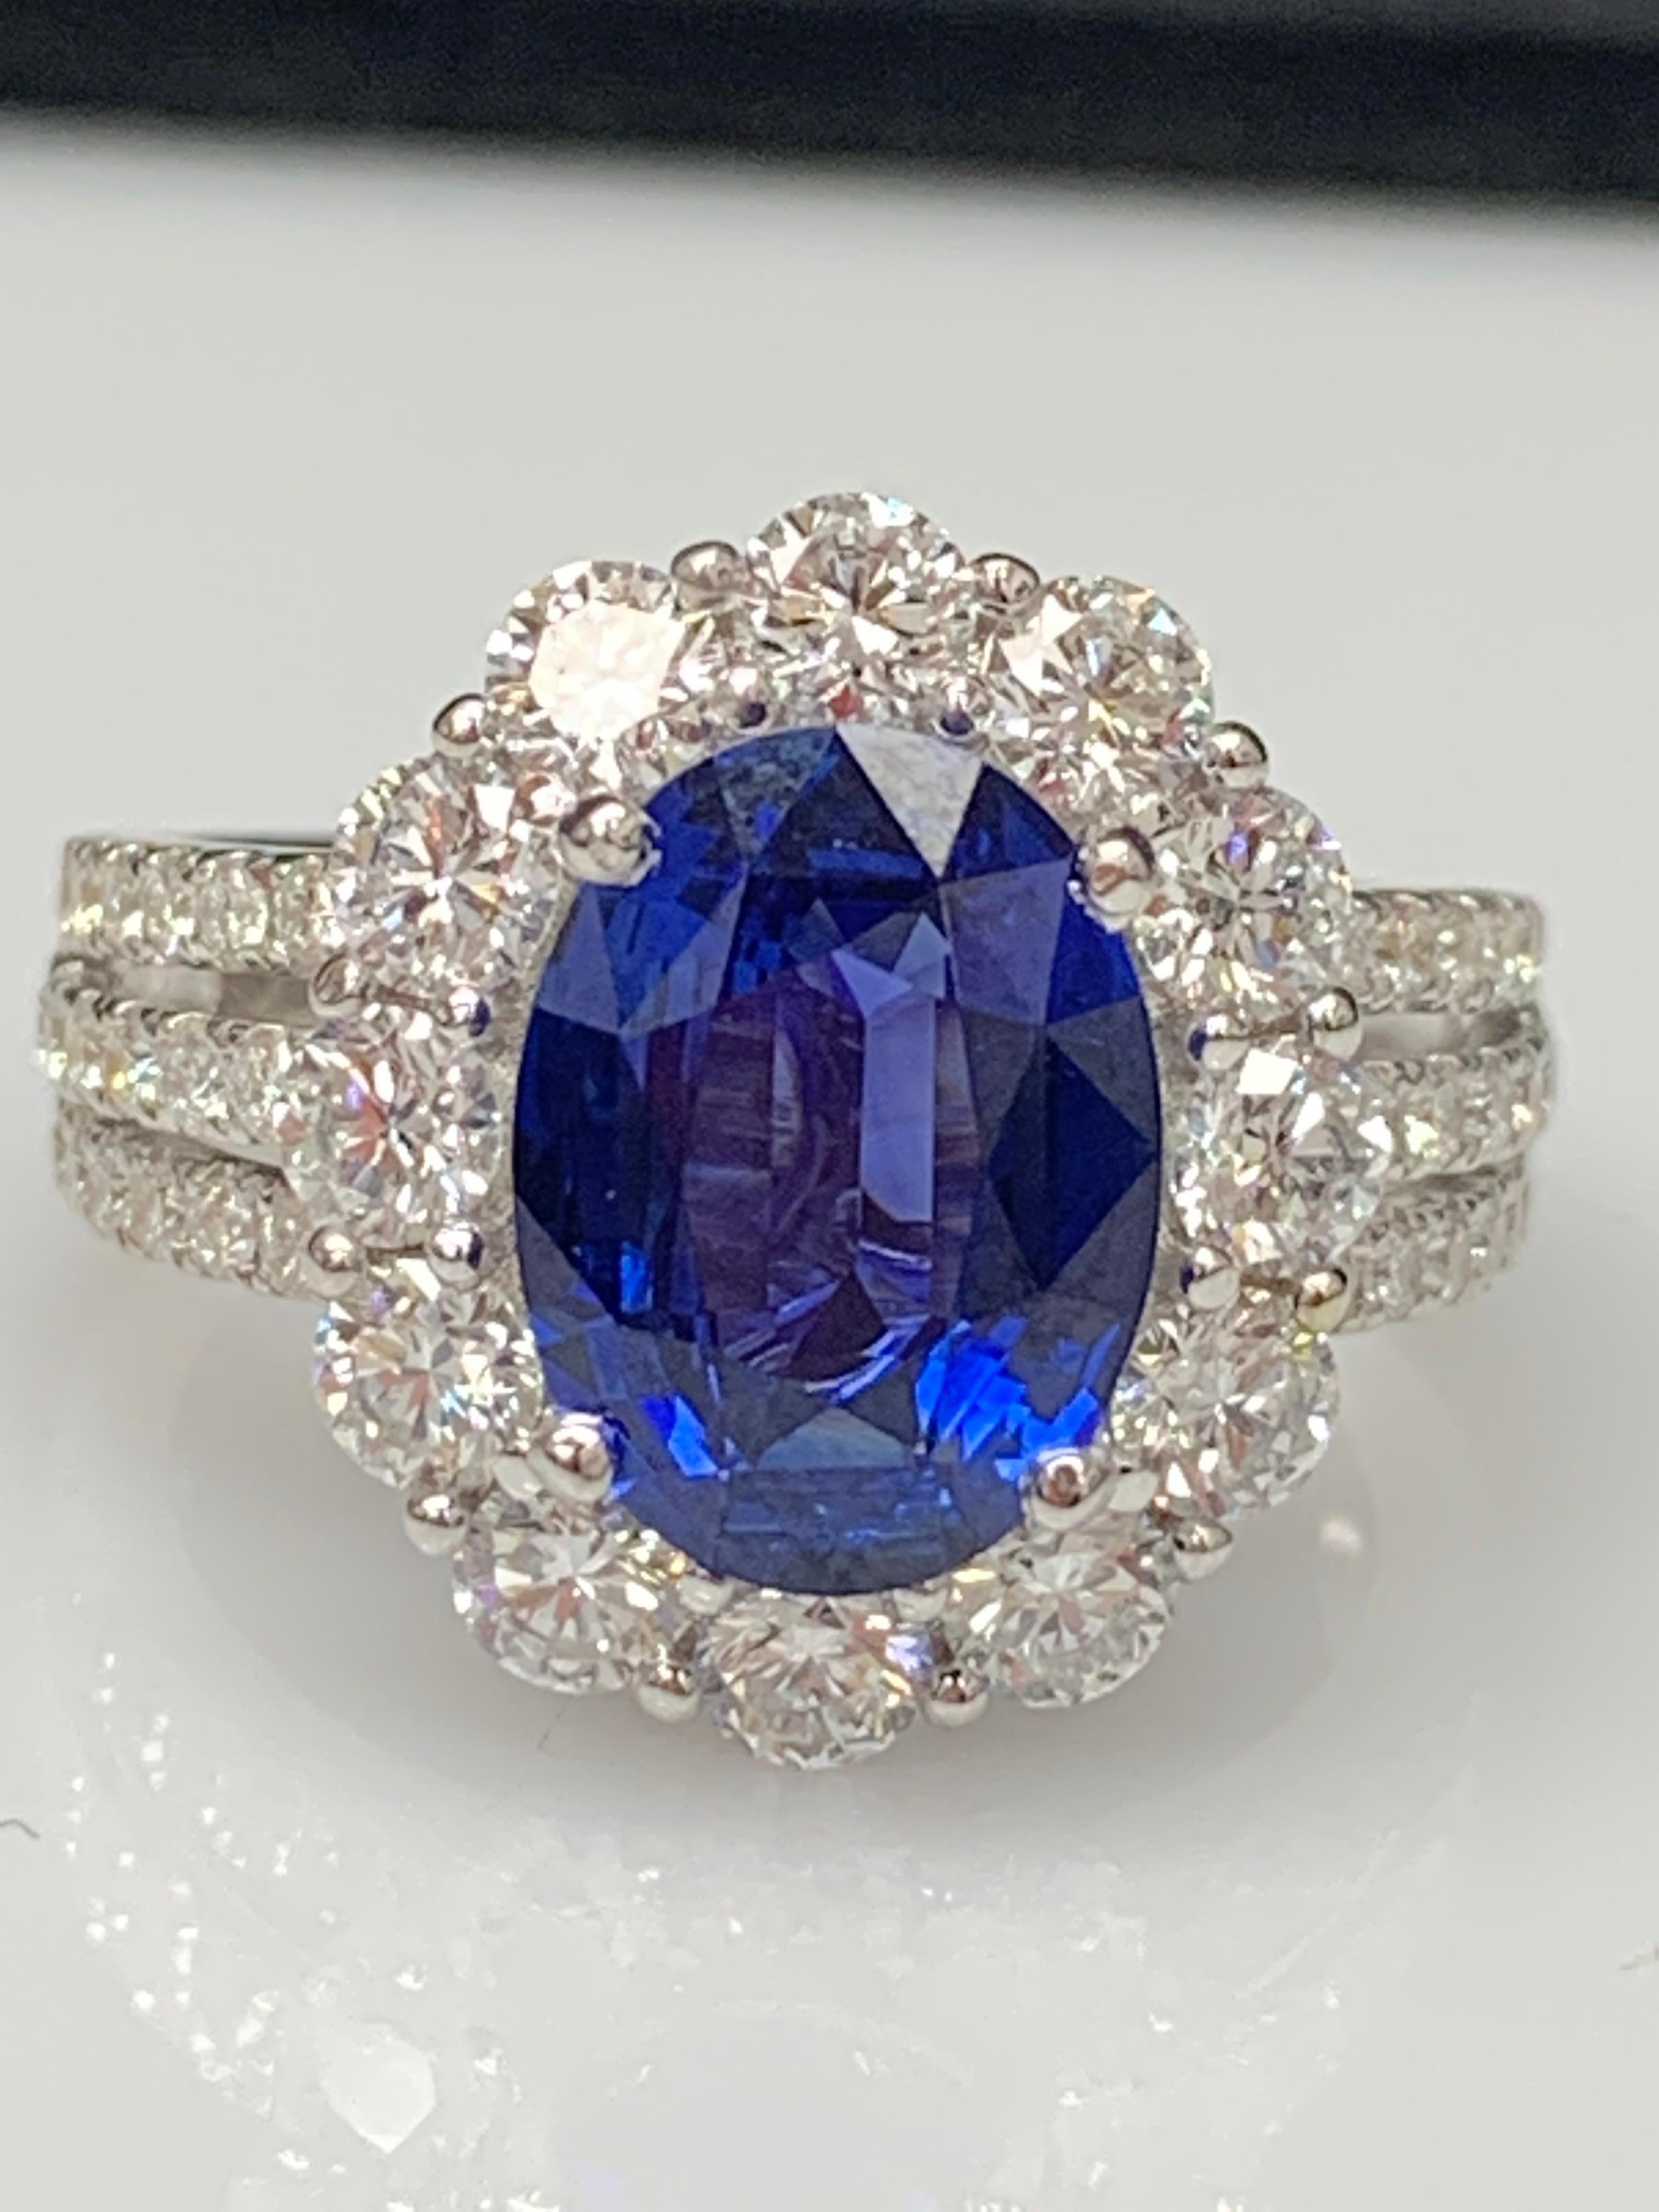 Features a beautiful 3.09-carat oval shape blue sapphire at the center. Surrounded by 12 brilliant-cut round diamonds weighing 1.32 carats in total. Diamonds are also set halfway all over the shank of the ring. The weight of the 46 accent diamonds